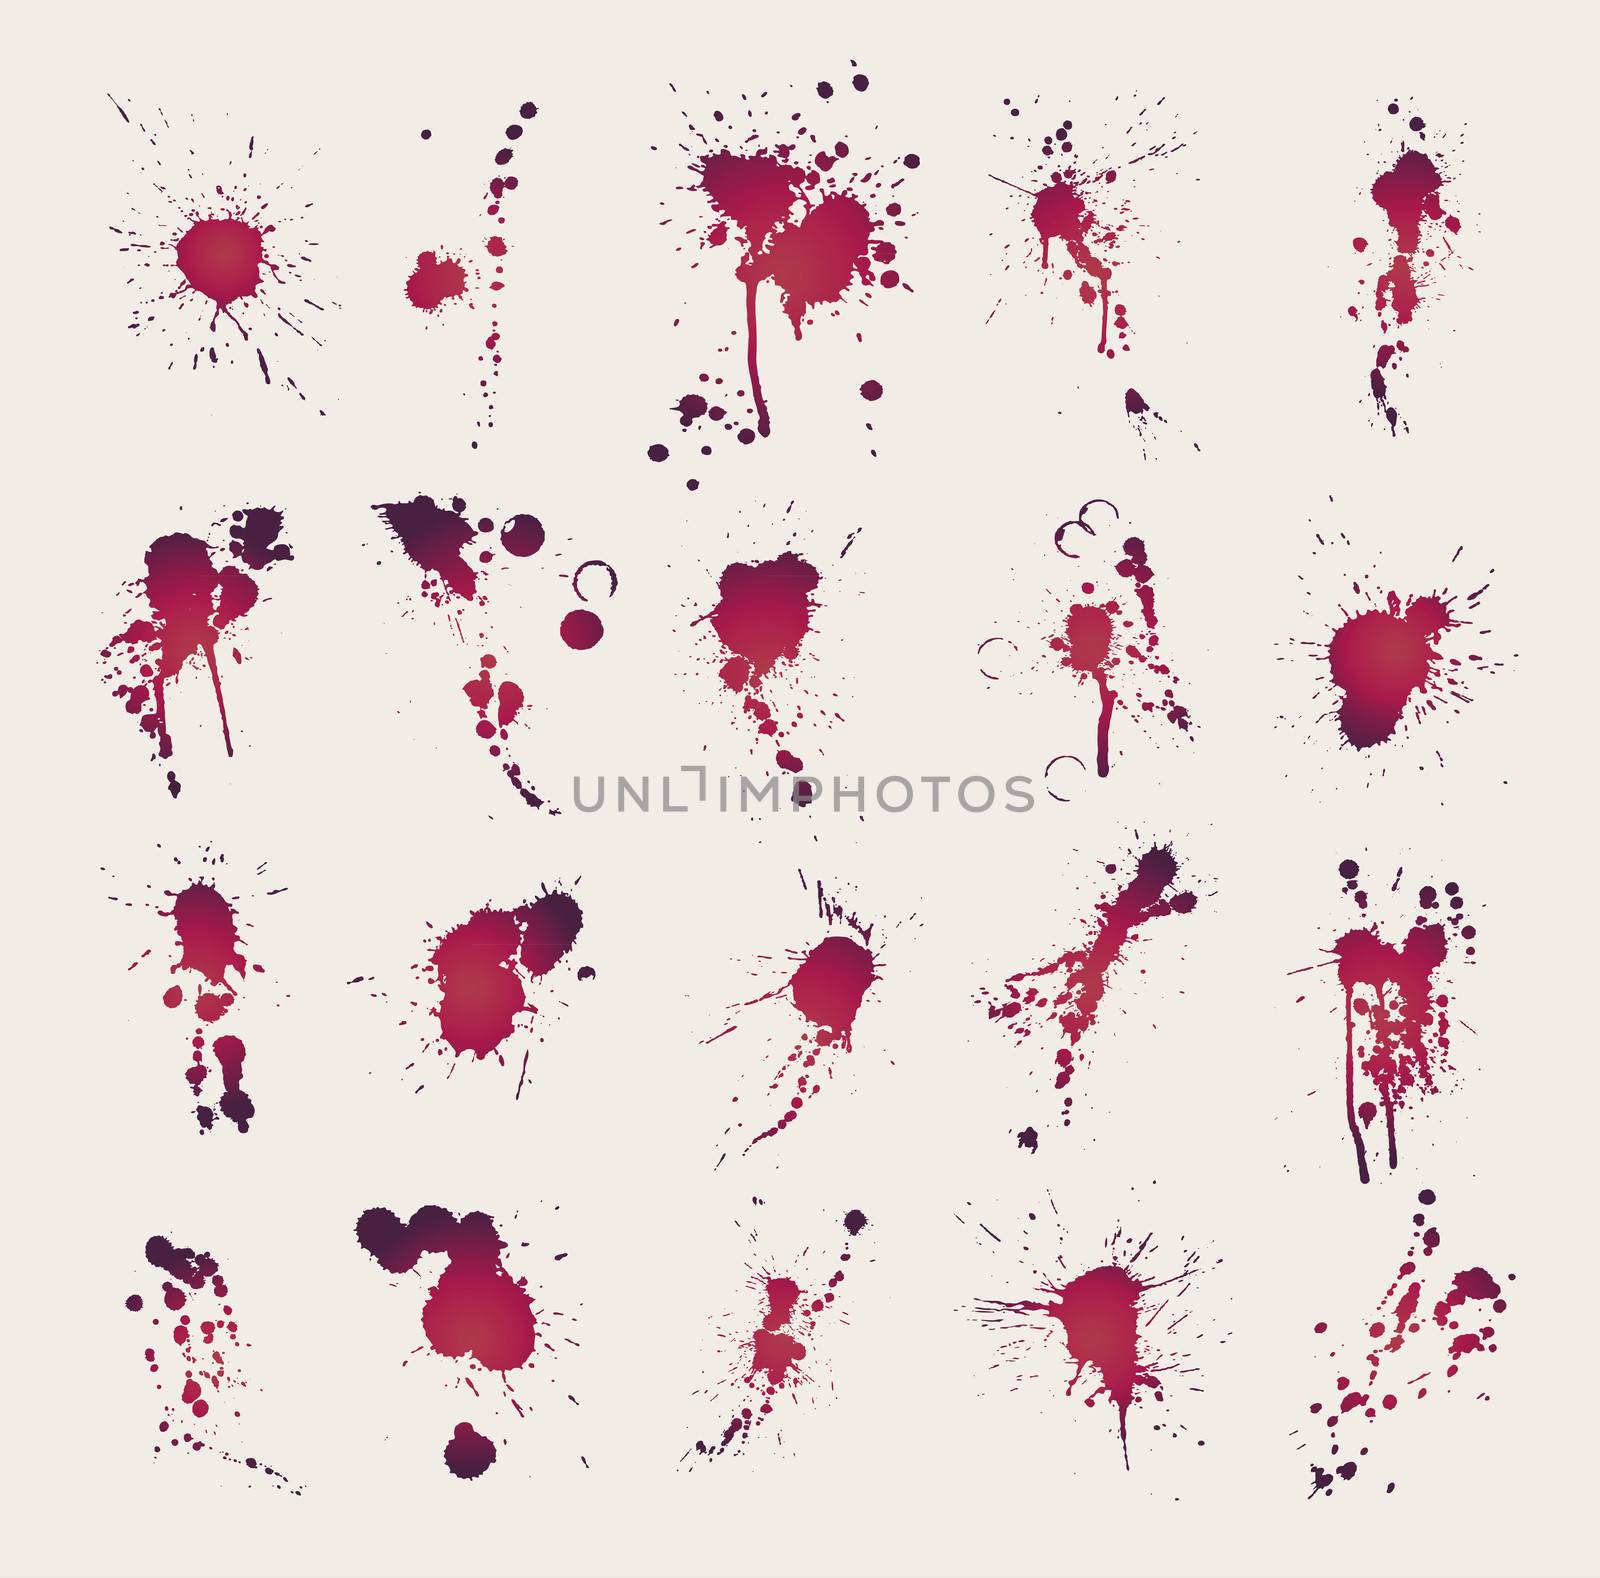 Twenty pieces of grungy ink splatters and stain design elements